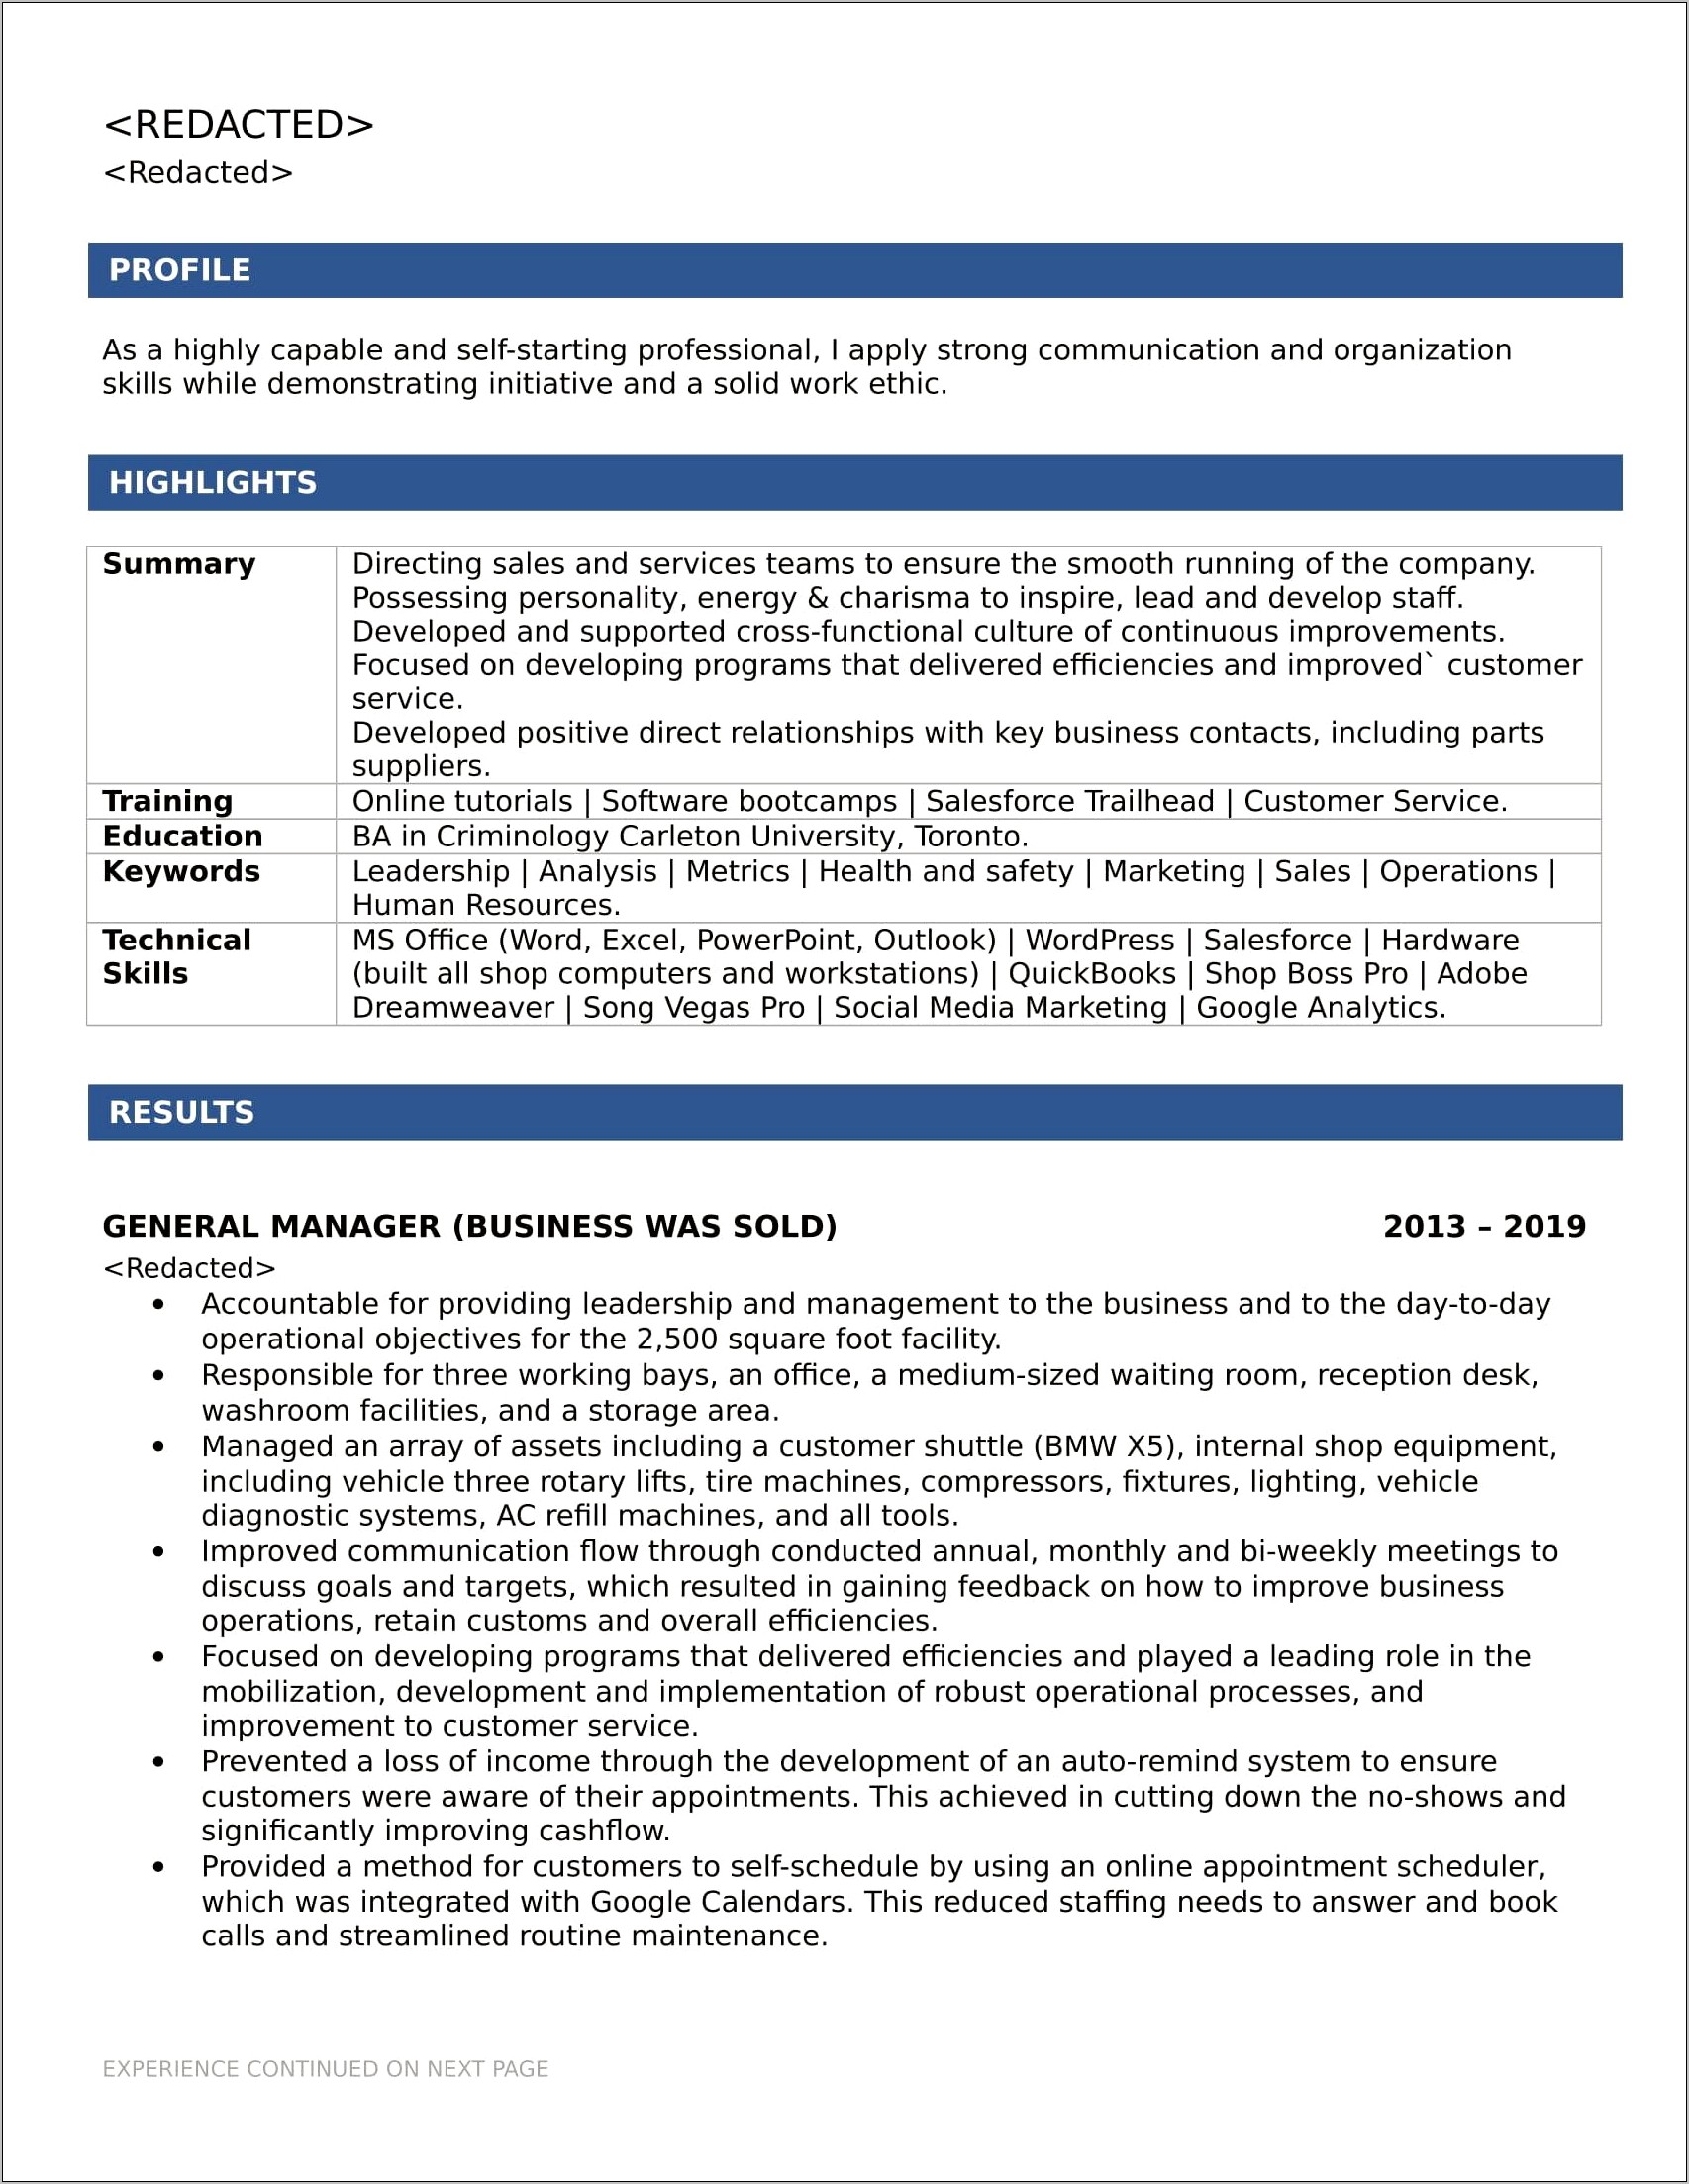 Resume Continuing Experience On Next Page